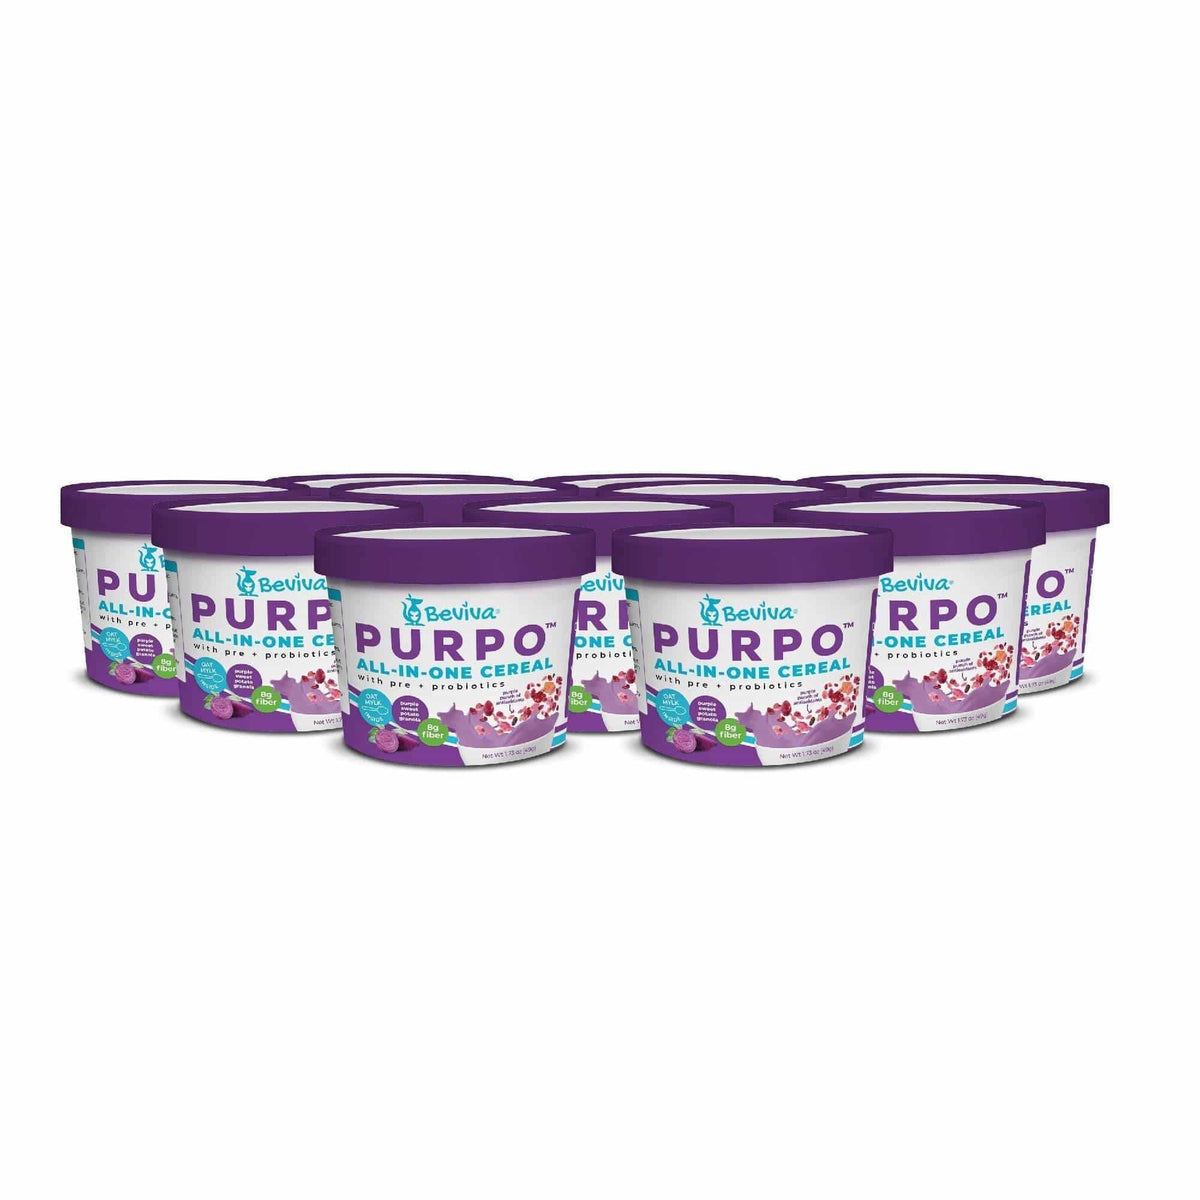 [Beviva] PURPO All-in-One Cereal Cup I 1.73 oz each I 8 Pack exclusive